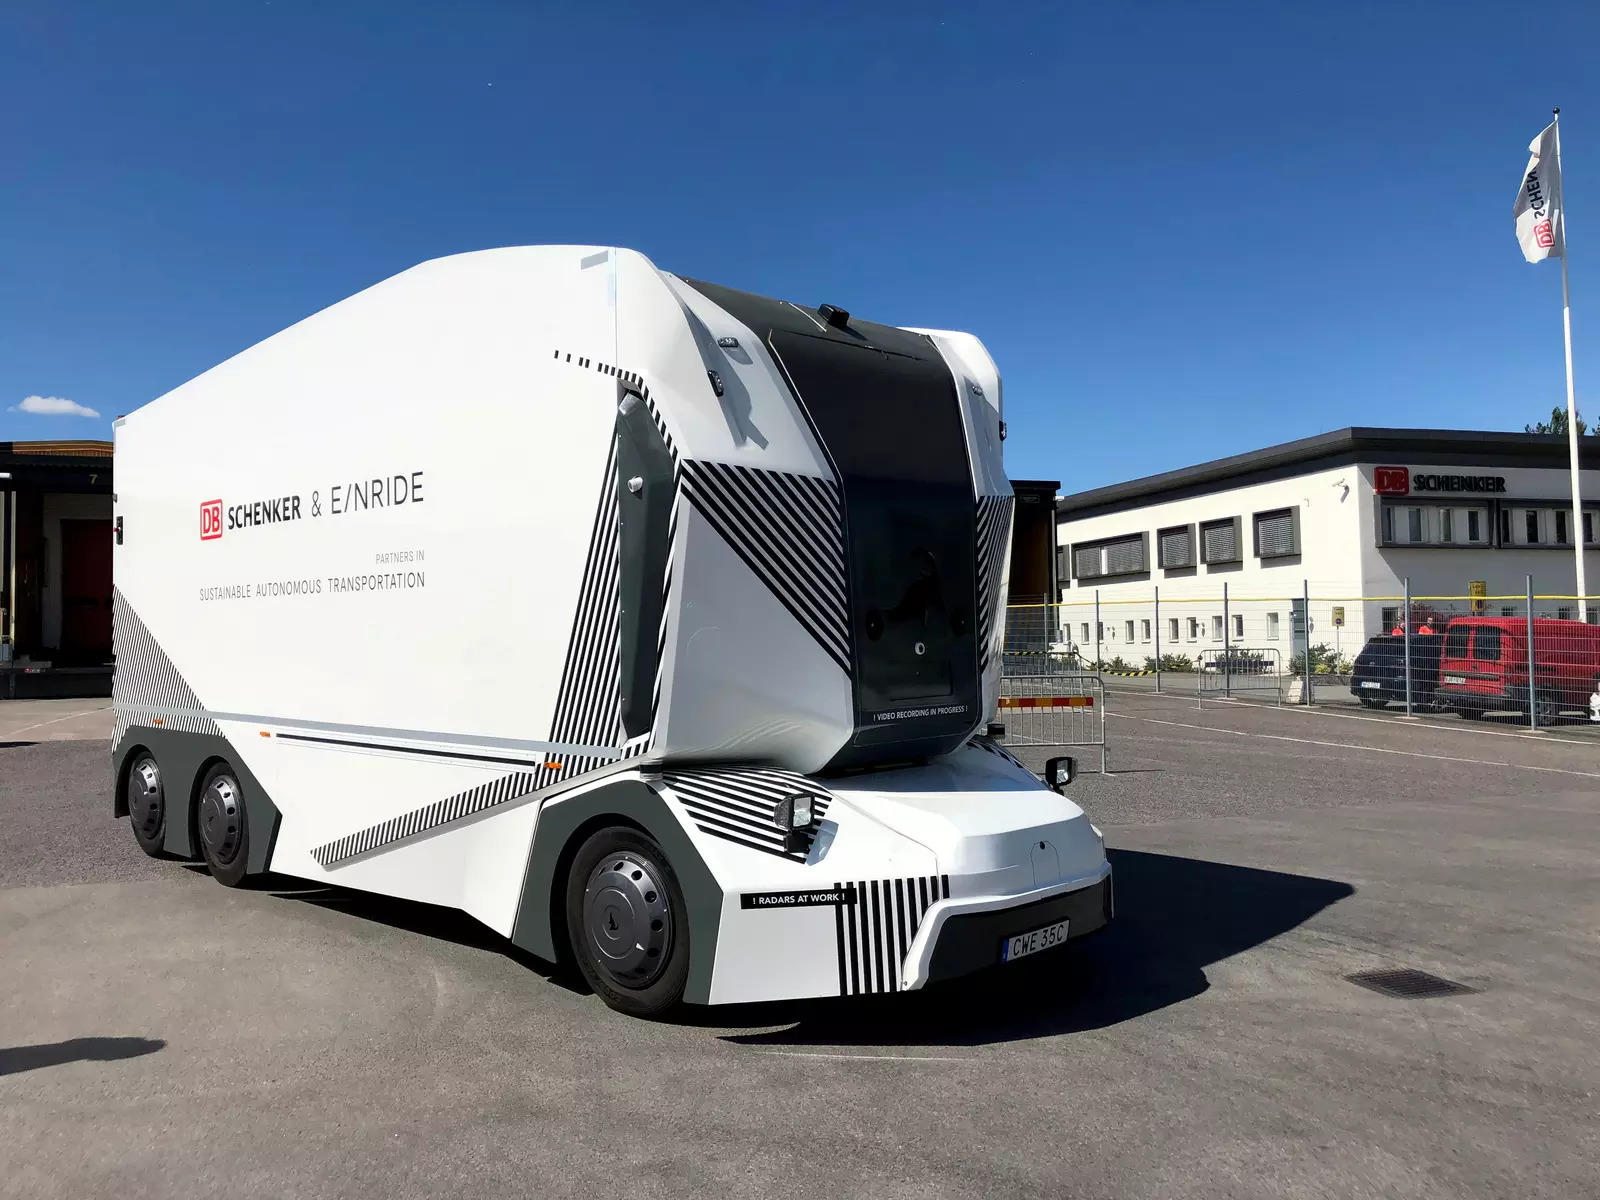 Self-driving technology for freight trucks has attracted investor attention as it should be easier and cheaper to roll out than in self-driving cars and robotaxis, while providing a clearer path to profitability.